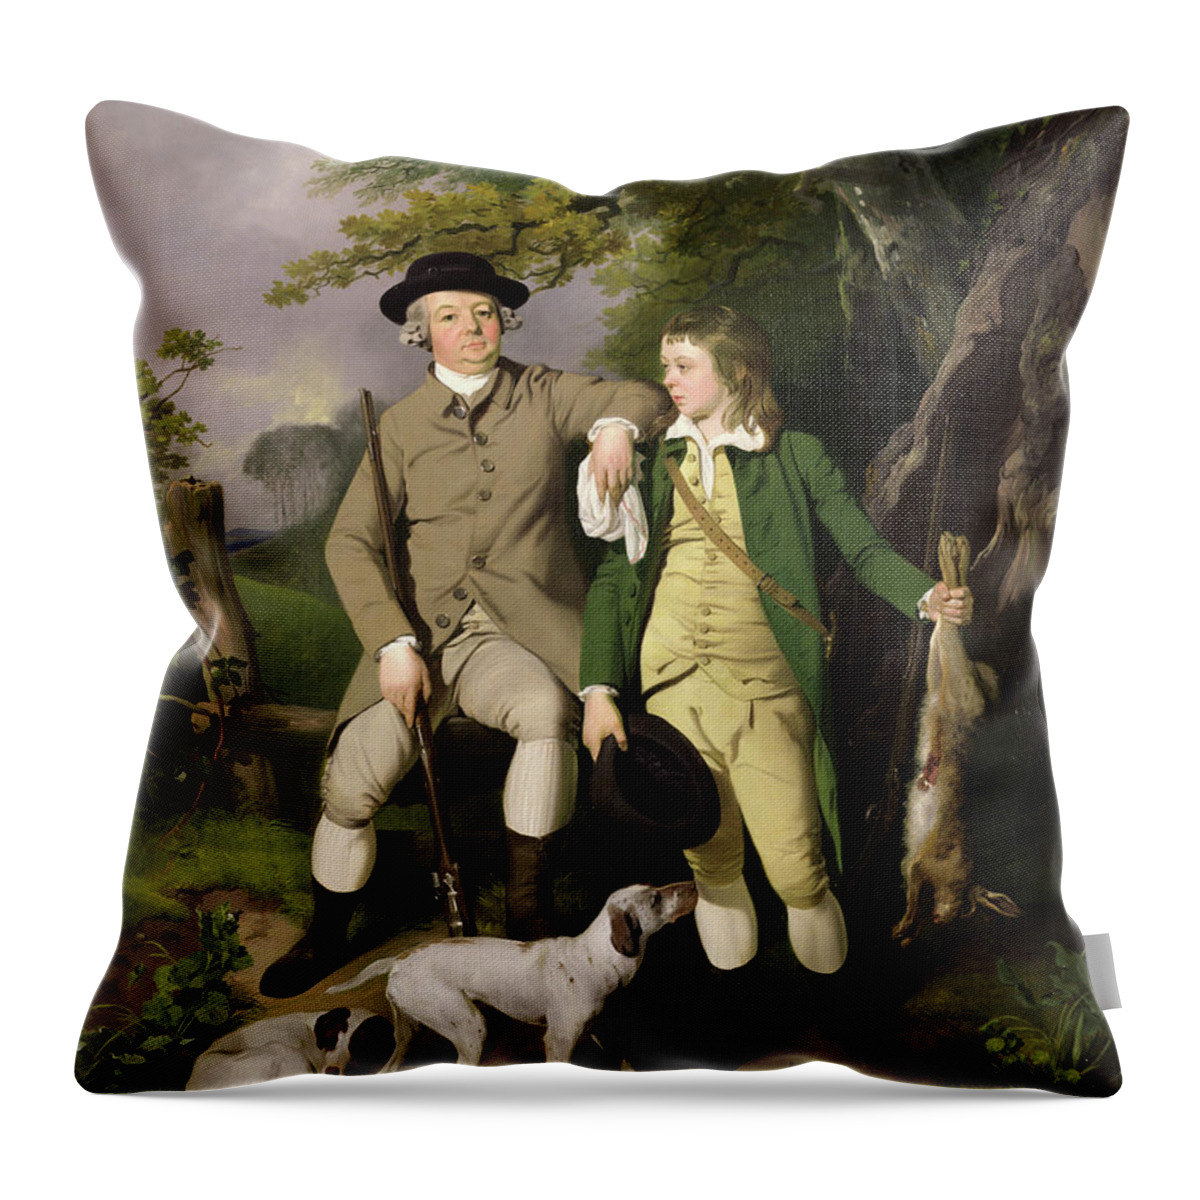 Walking Stick Throw Pillow featuring the painting Portrait Of A Sportsman With His Son, 1779 by Francis Wheatley